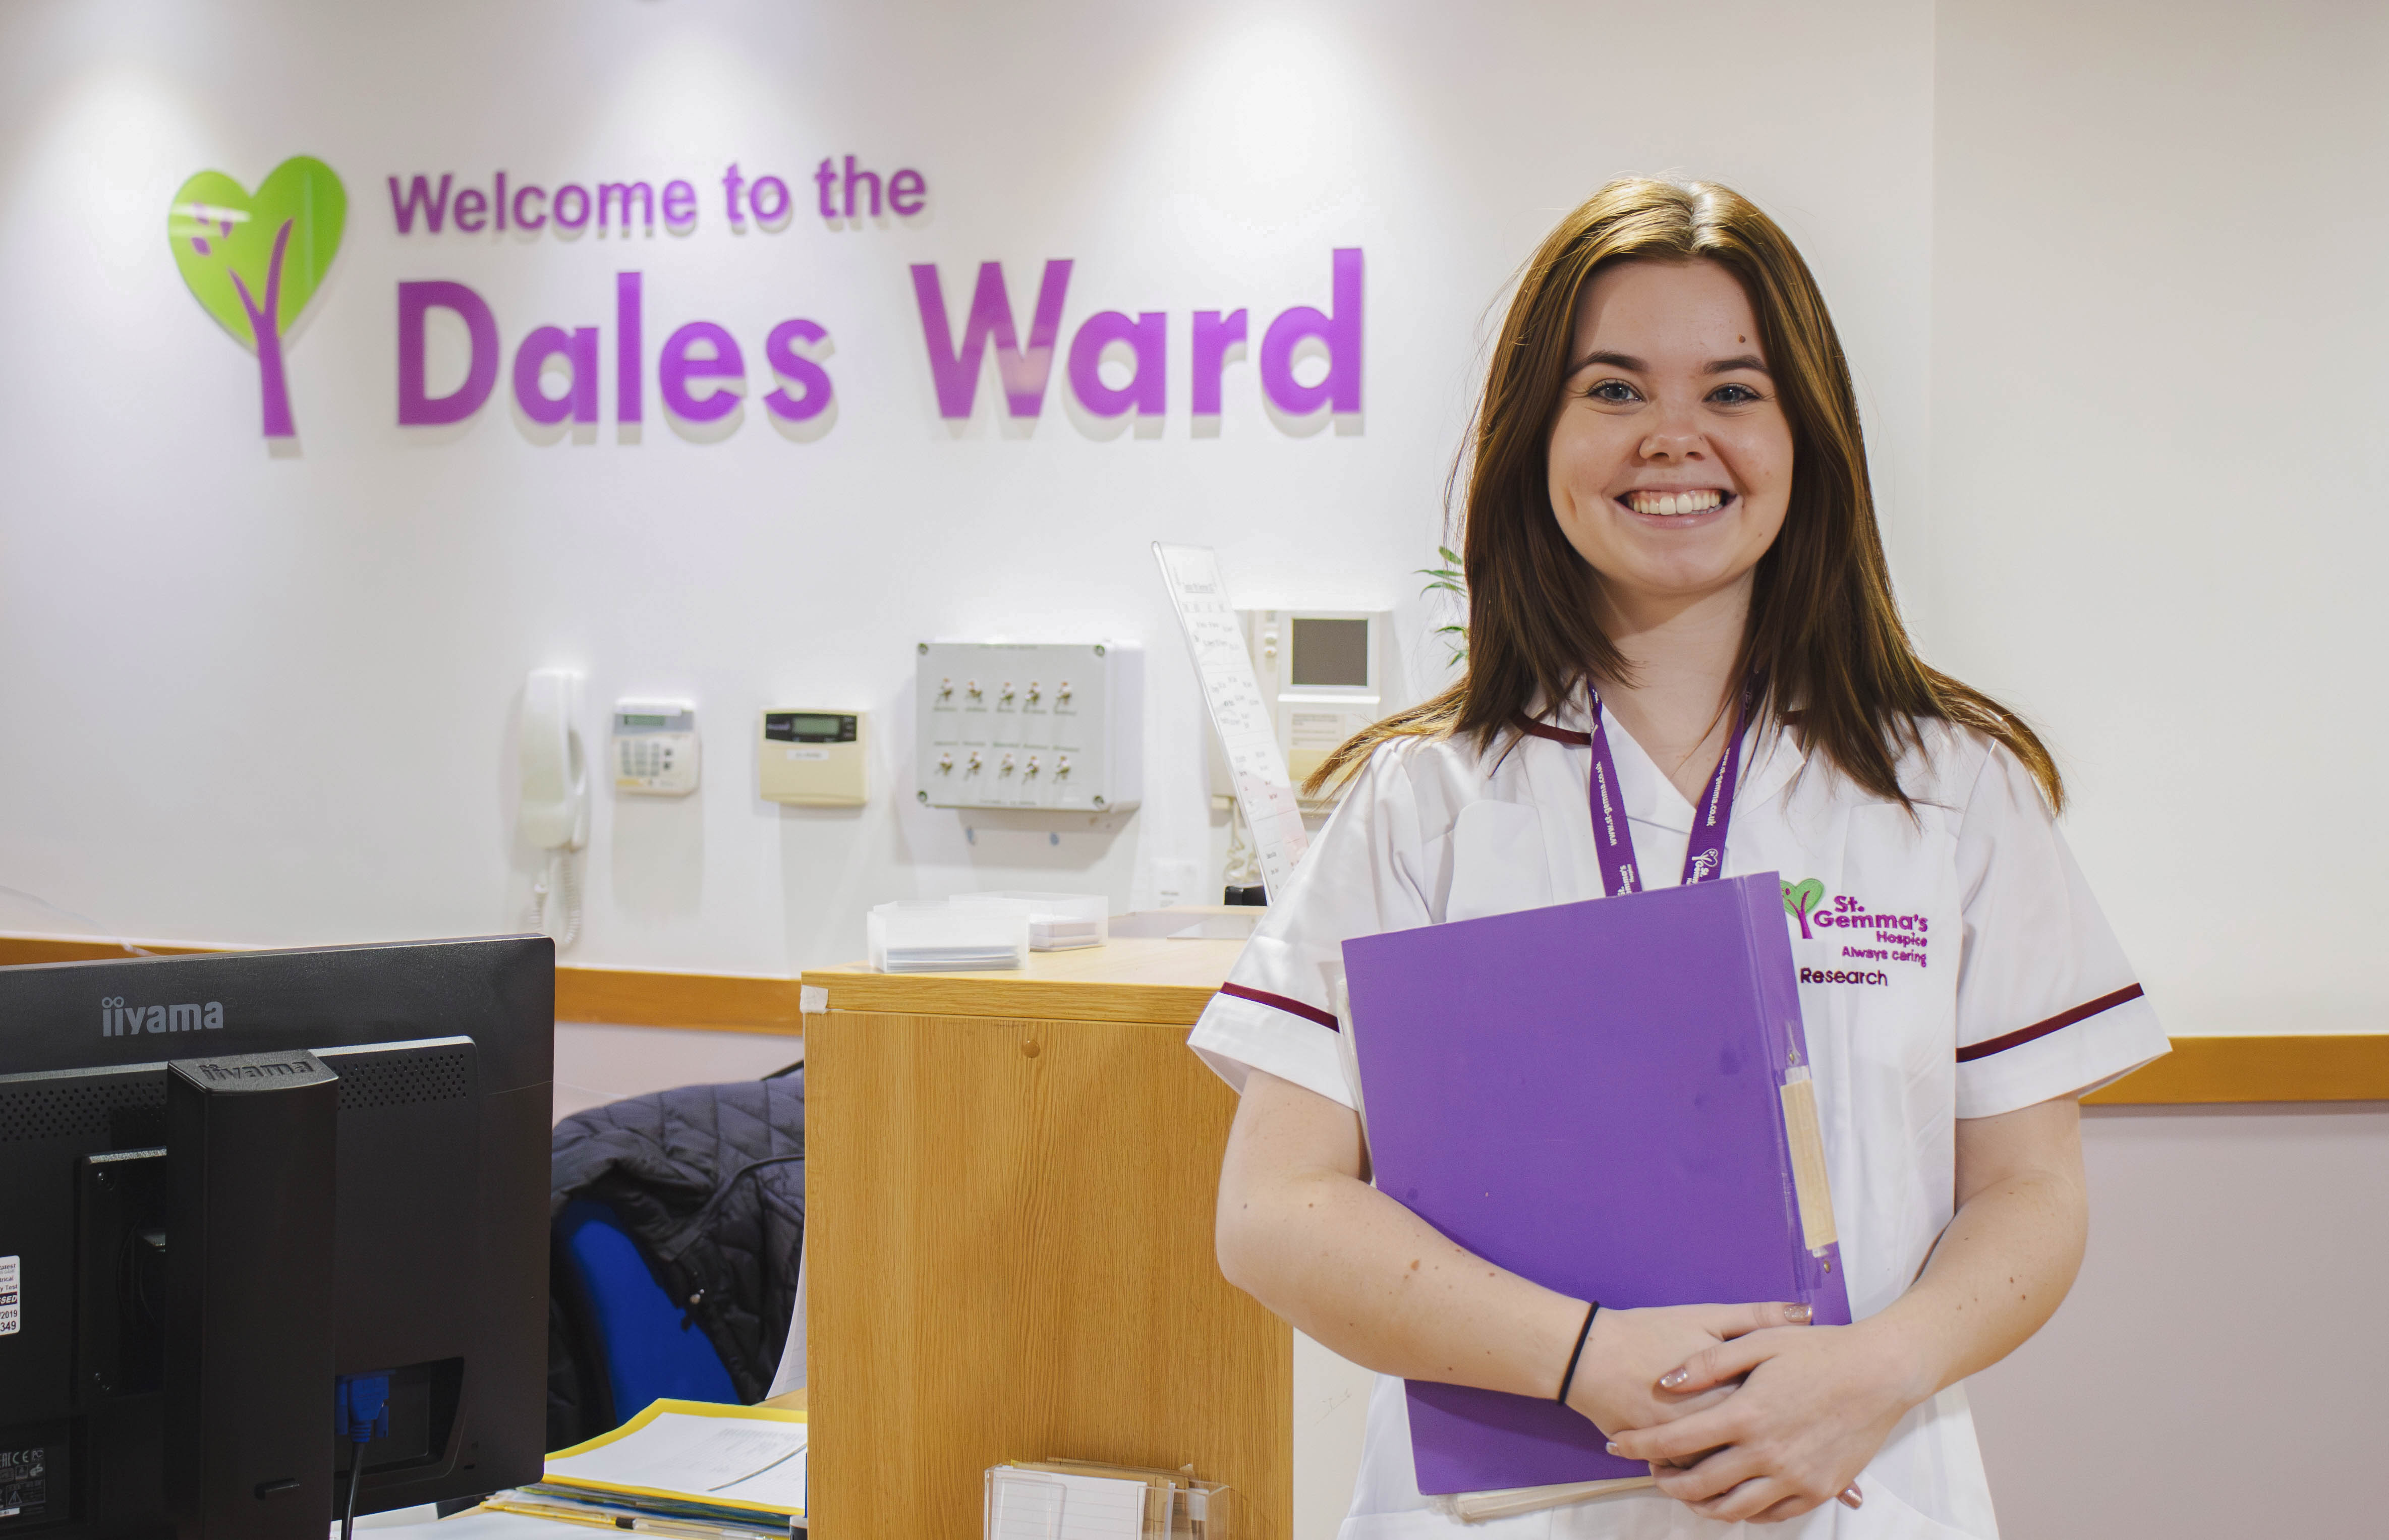 Woman wearing a white nurse's uniform is holding a purple folder and standing in front of a sign that reads Welcome to the Dales Ward